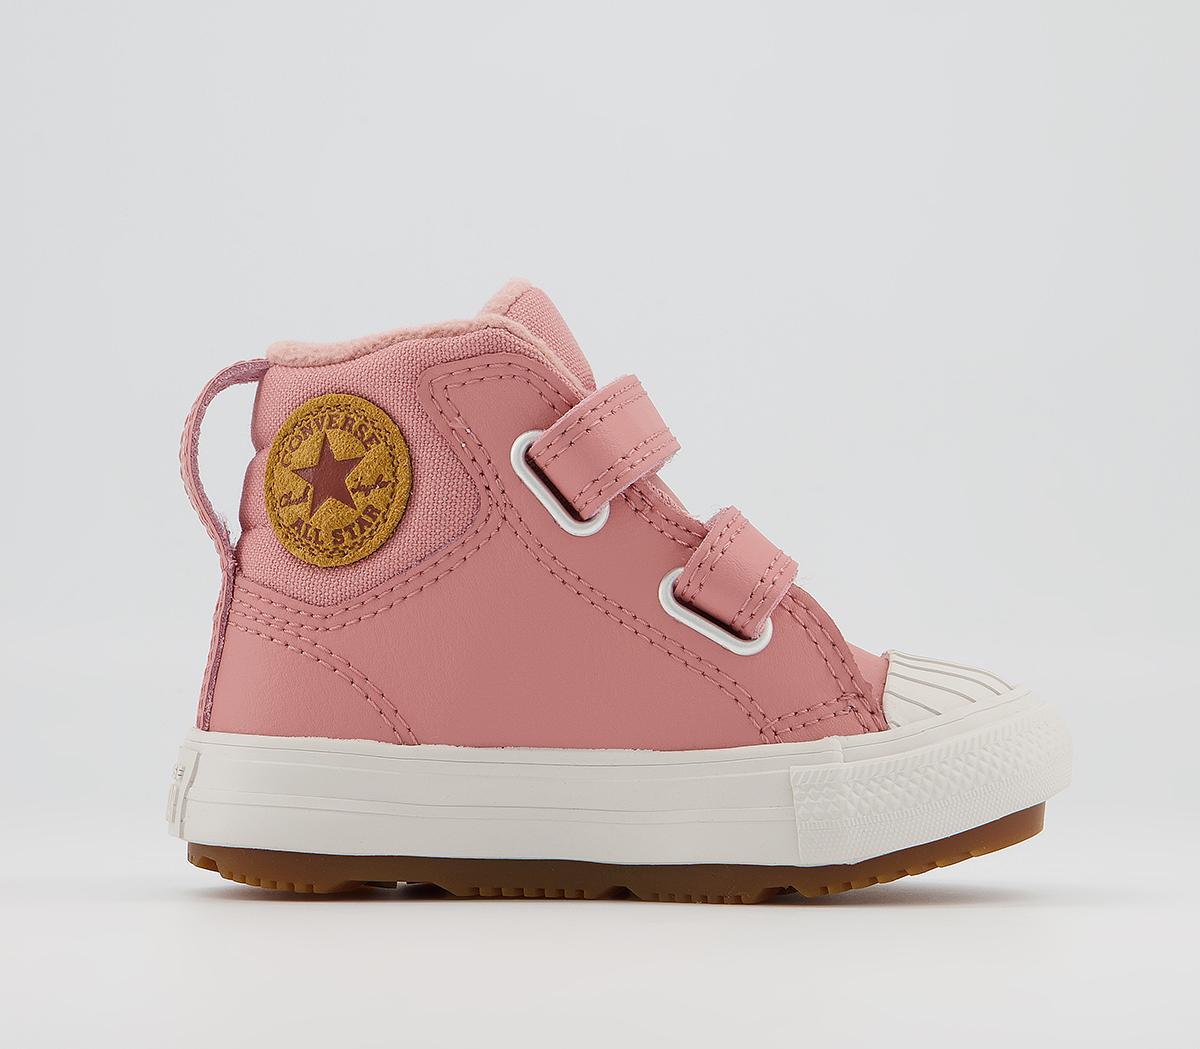 ConverseAll Star Berkshire Boot 2v Infant TrainersRust Pink Pale Putty